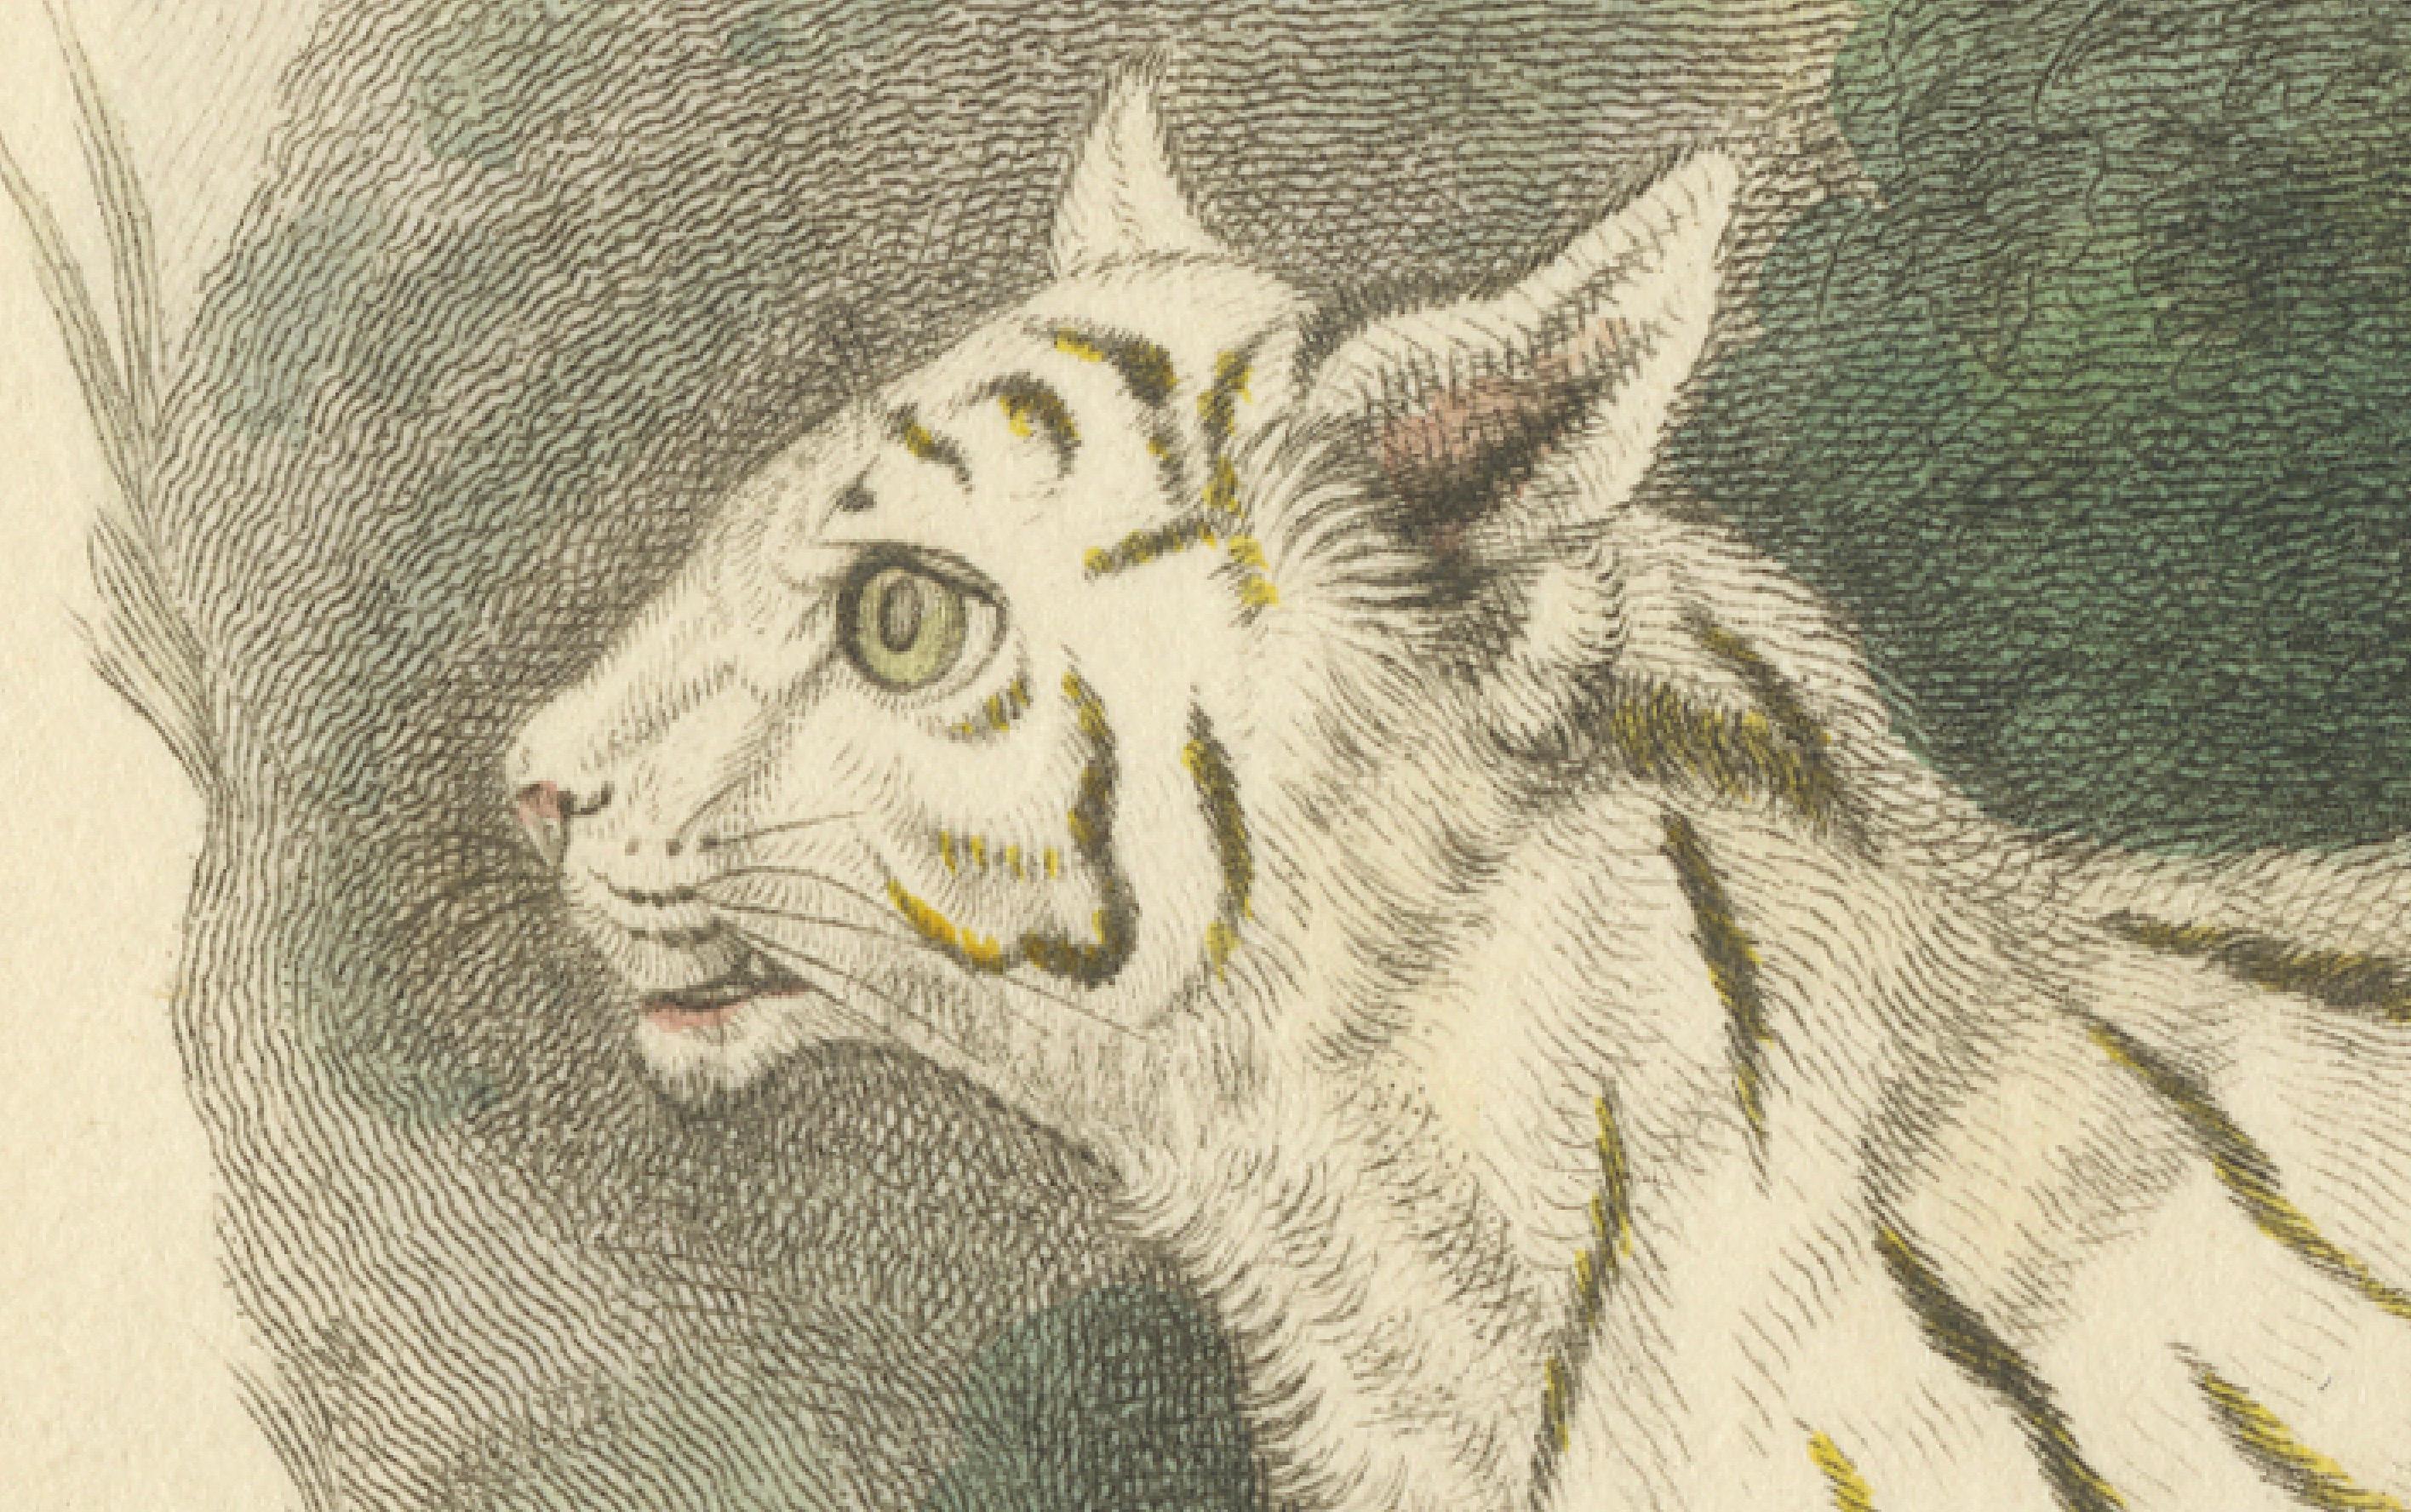 The image is an original antique print titled 'The Colocolo, F. Colocolo of Molina', an original work with hand coloring depicting a Pampas cat. The scientific name provided, F. Colocolo, refers to the colloquial name 